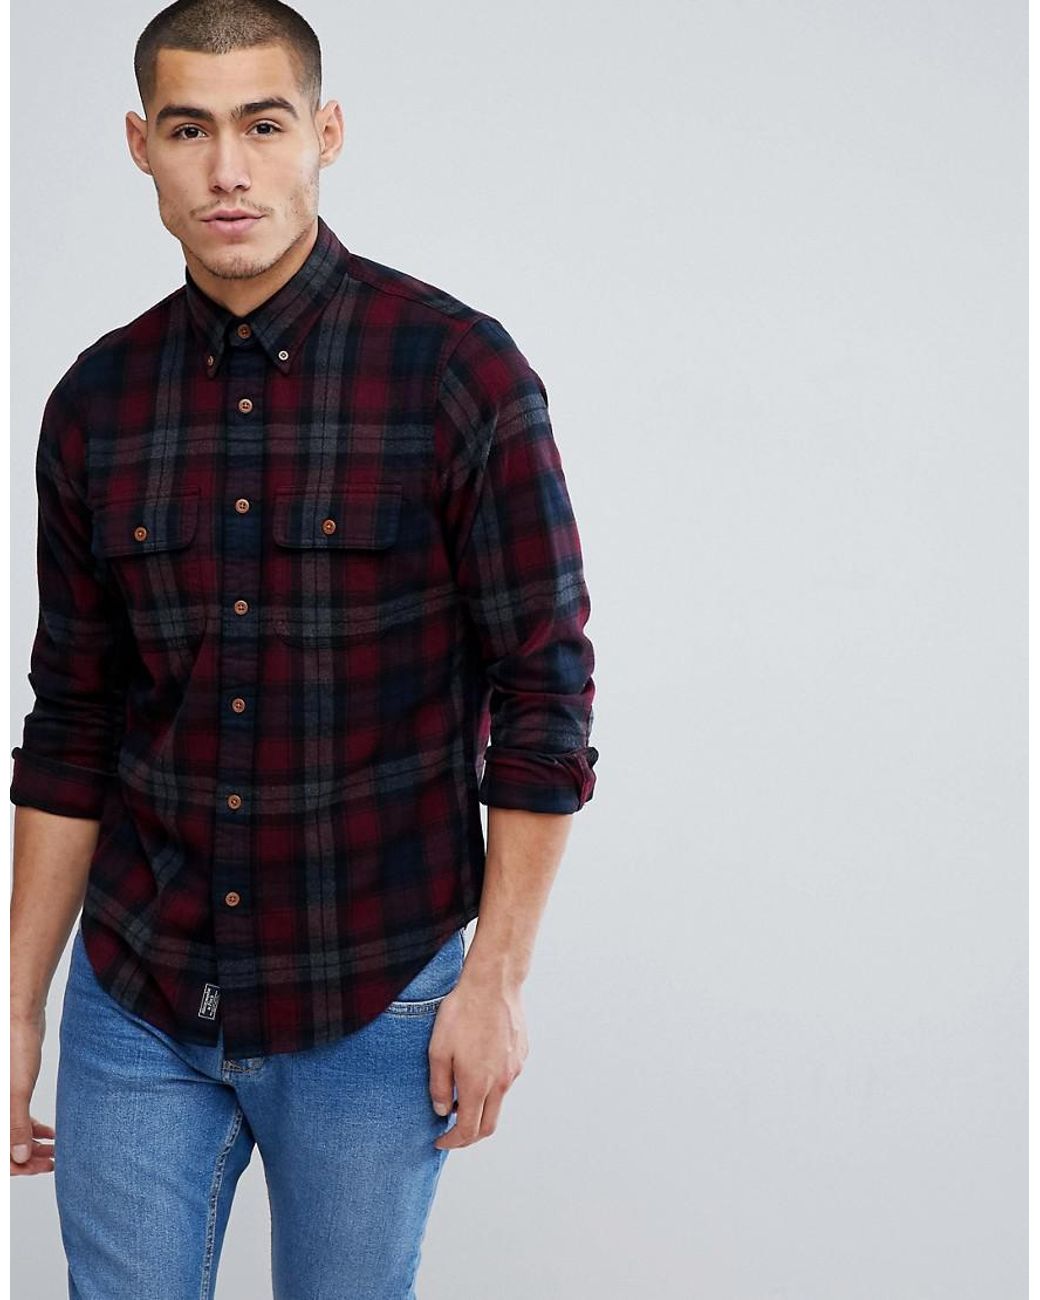 Abercrombie & Fitch Check Flannel Shirt Regular Fit In Burgundy Blackwatch  Plaid in Red for Men | Lyst Canada